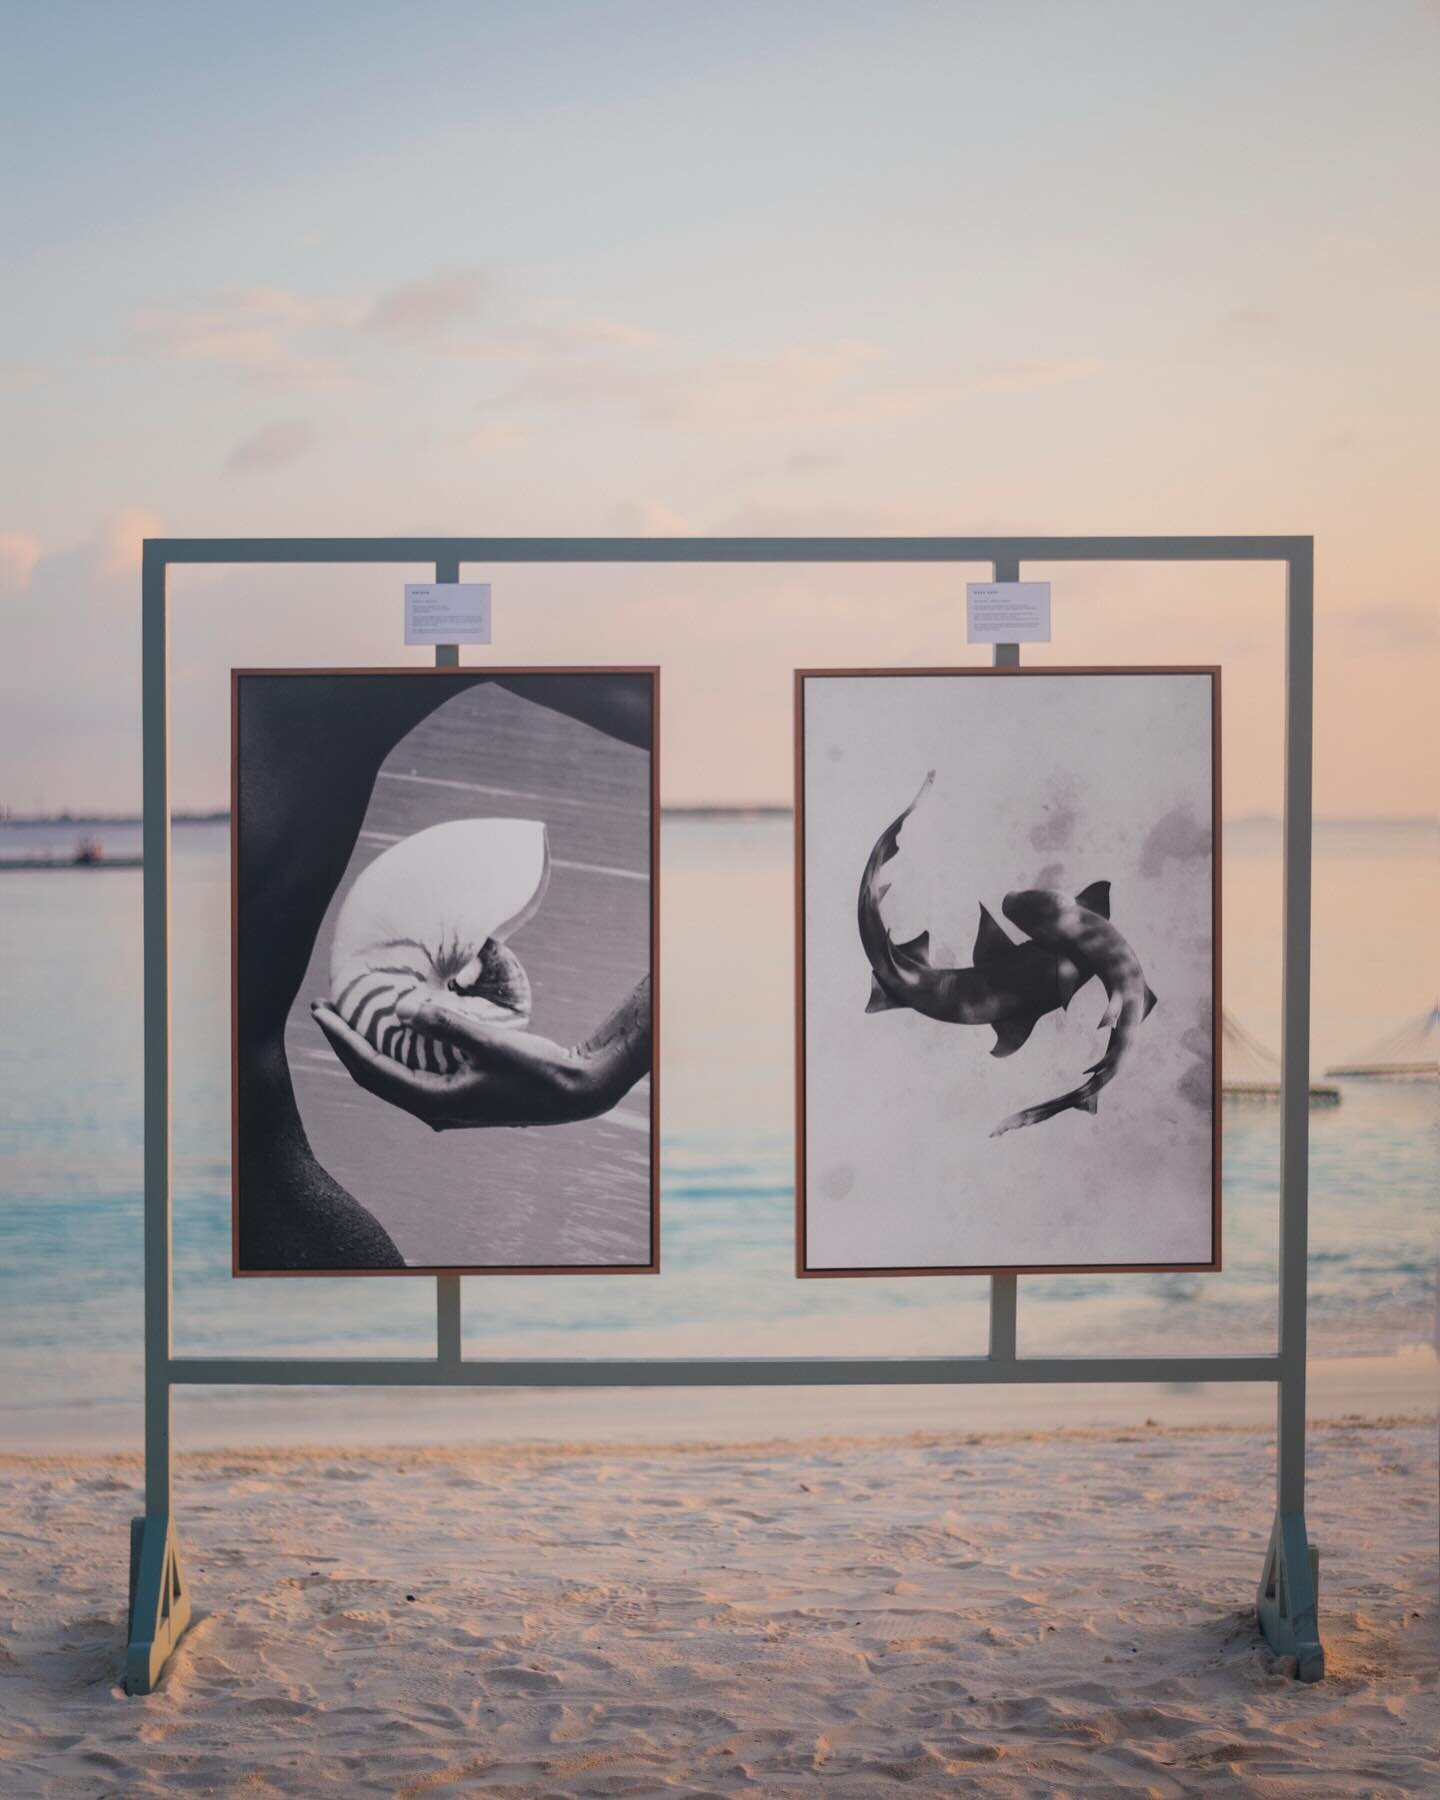 Impressions of my fine art photography displayed at the Maldivian sea side at @joalibeing 

Blending what may look like two different ends of the spectrum &ndash; ethical underwater wild life photography and conceptualised sensual art &ndash; into on